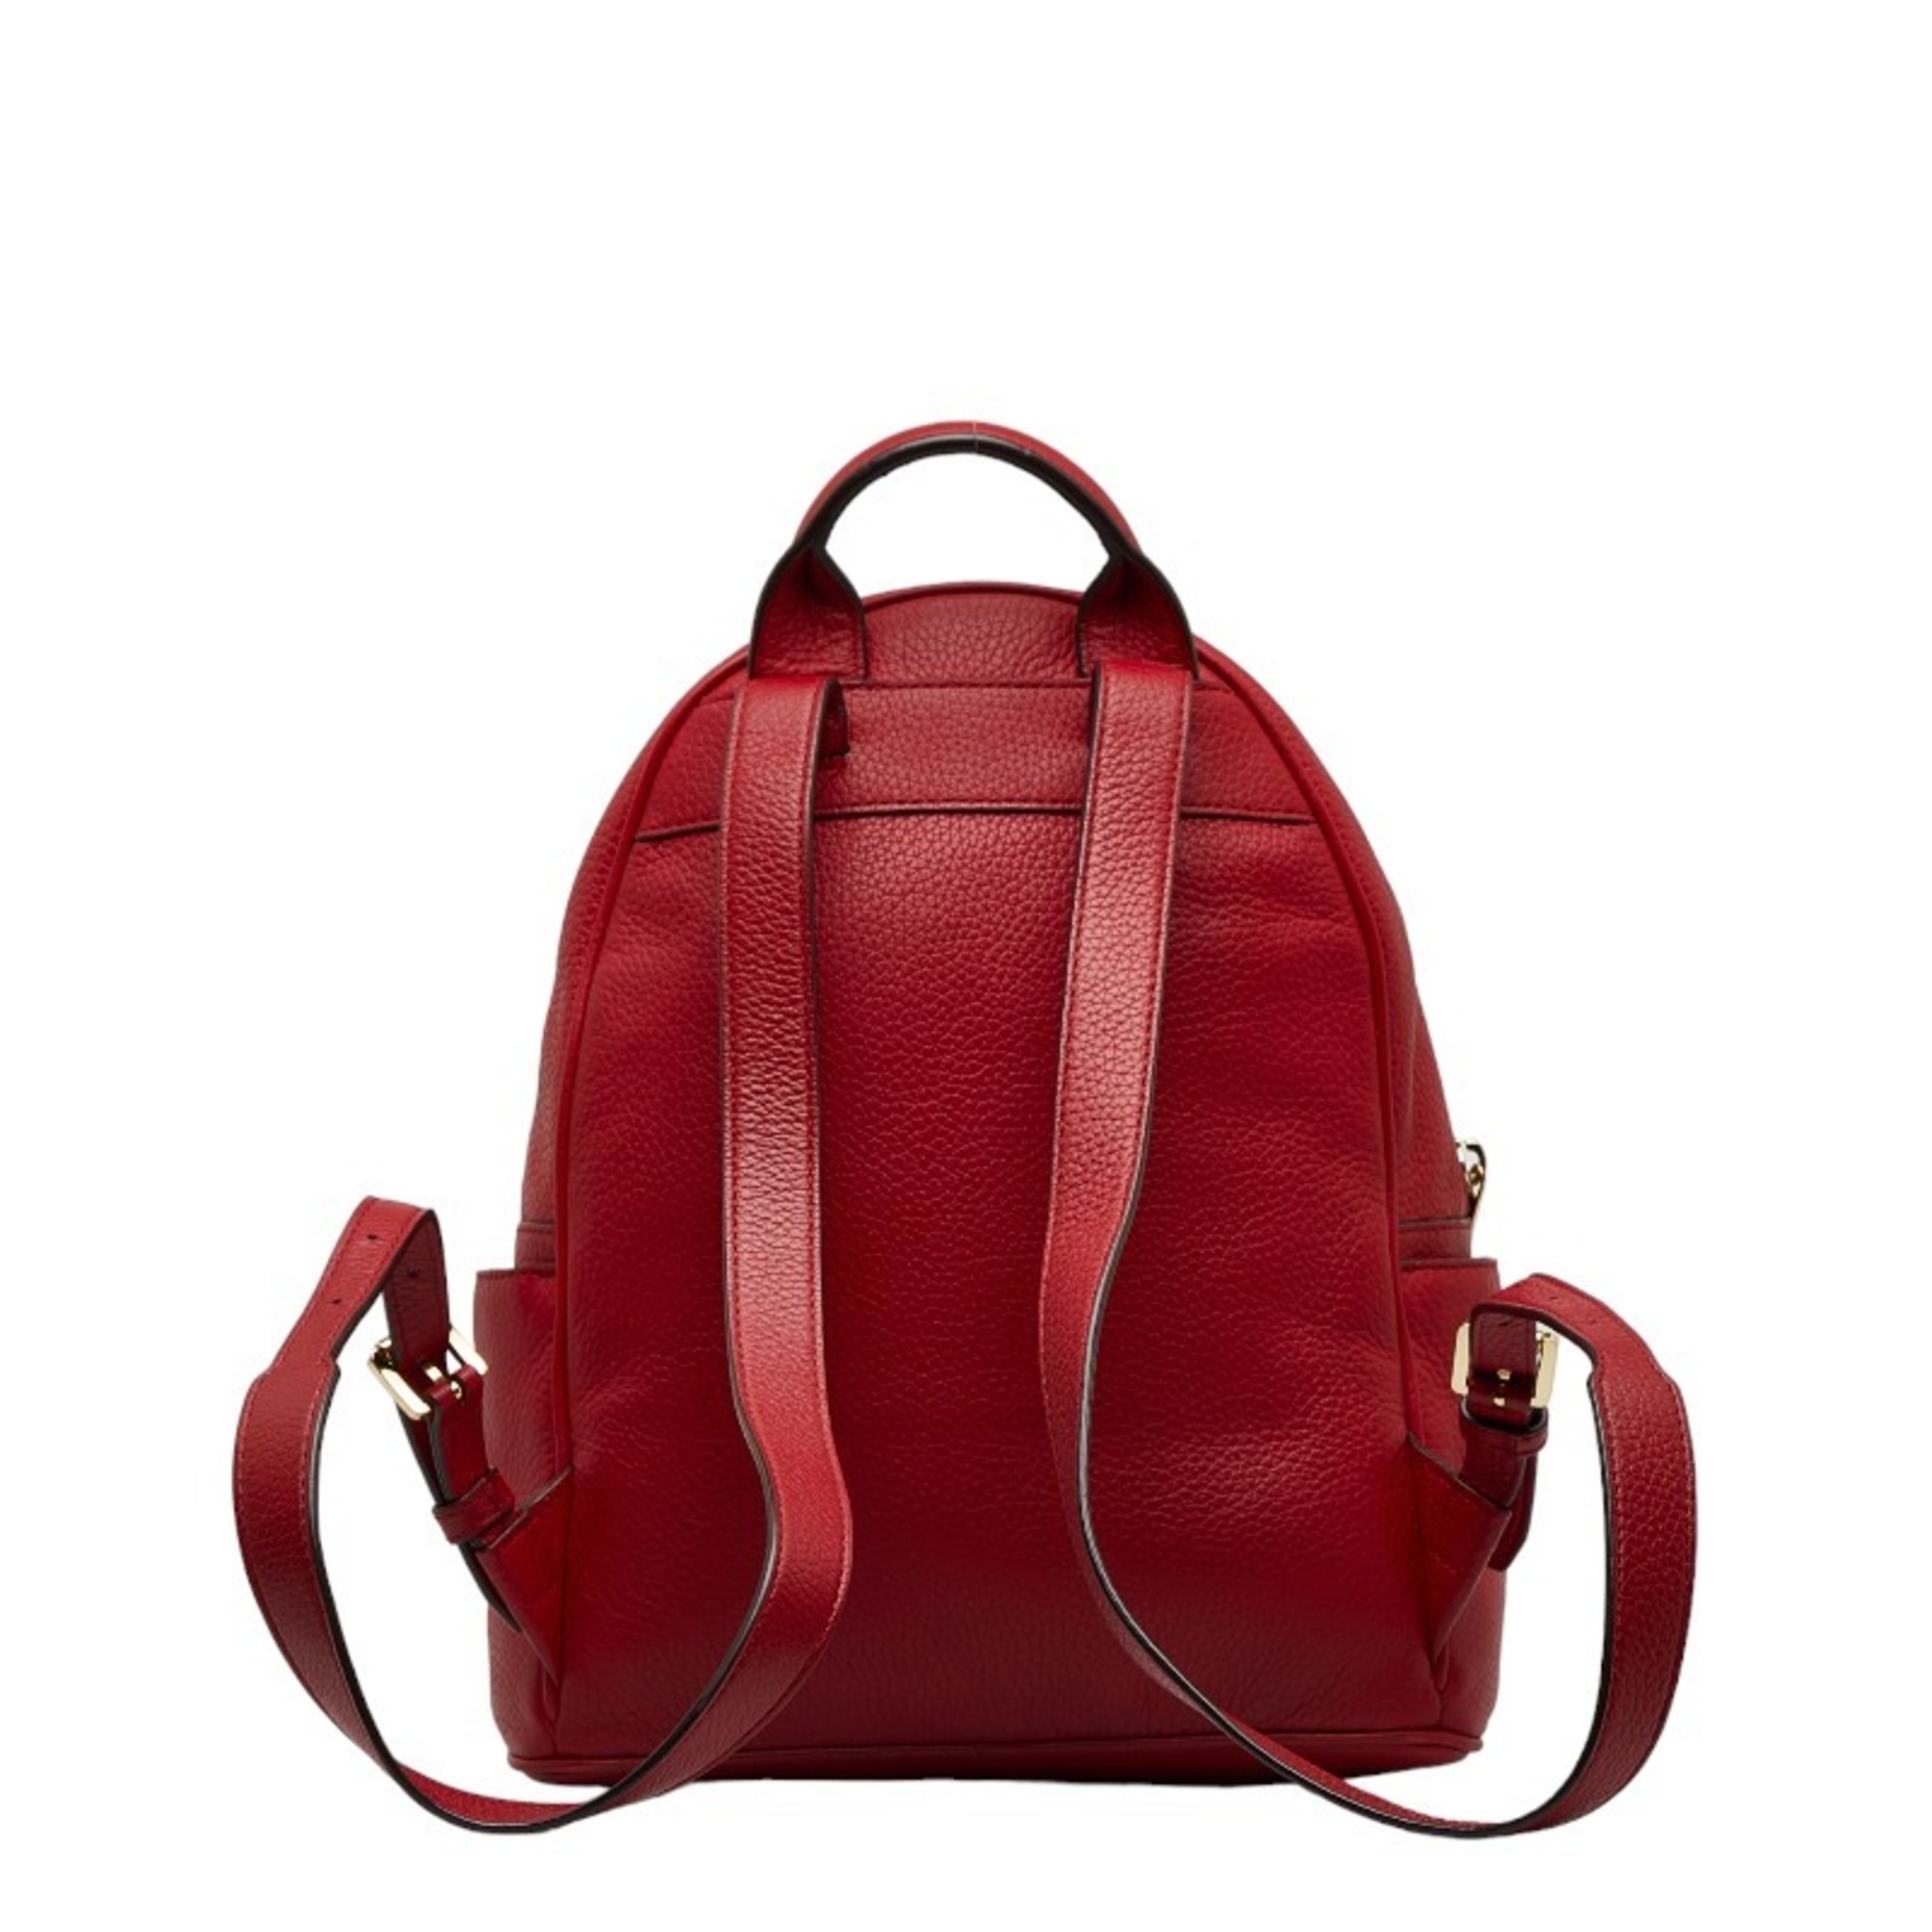 Michael Kors Studded Backpack/Daypack Red Leather Women's